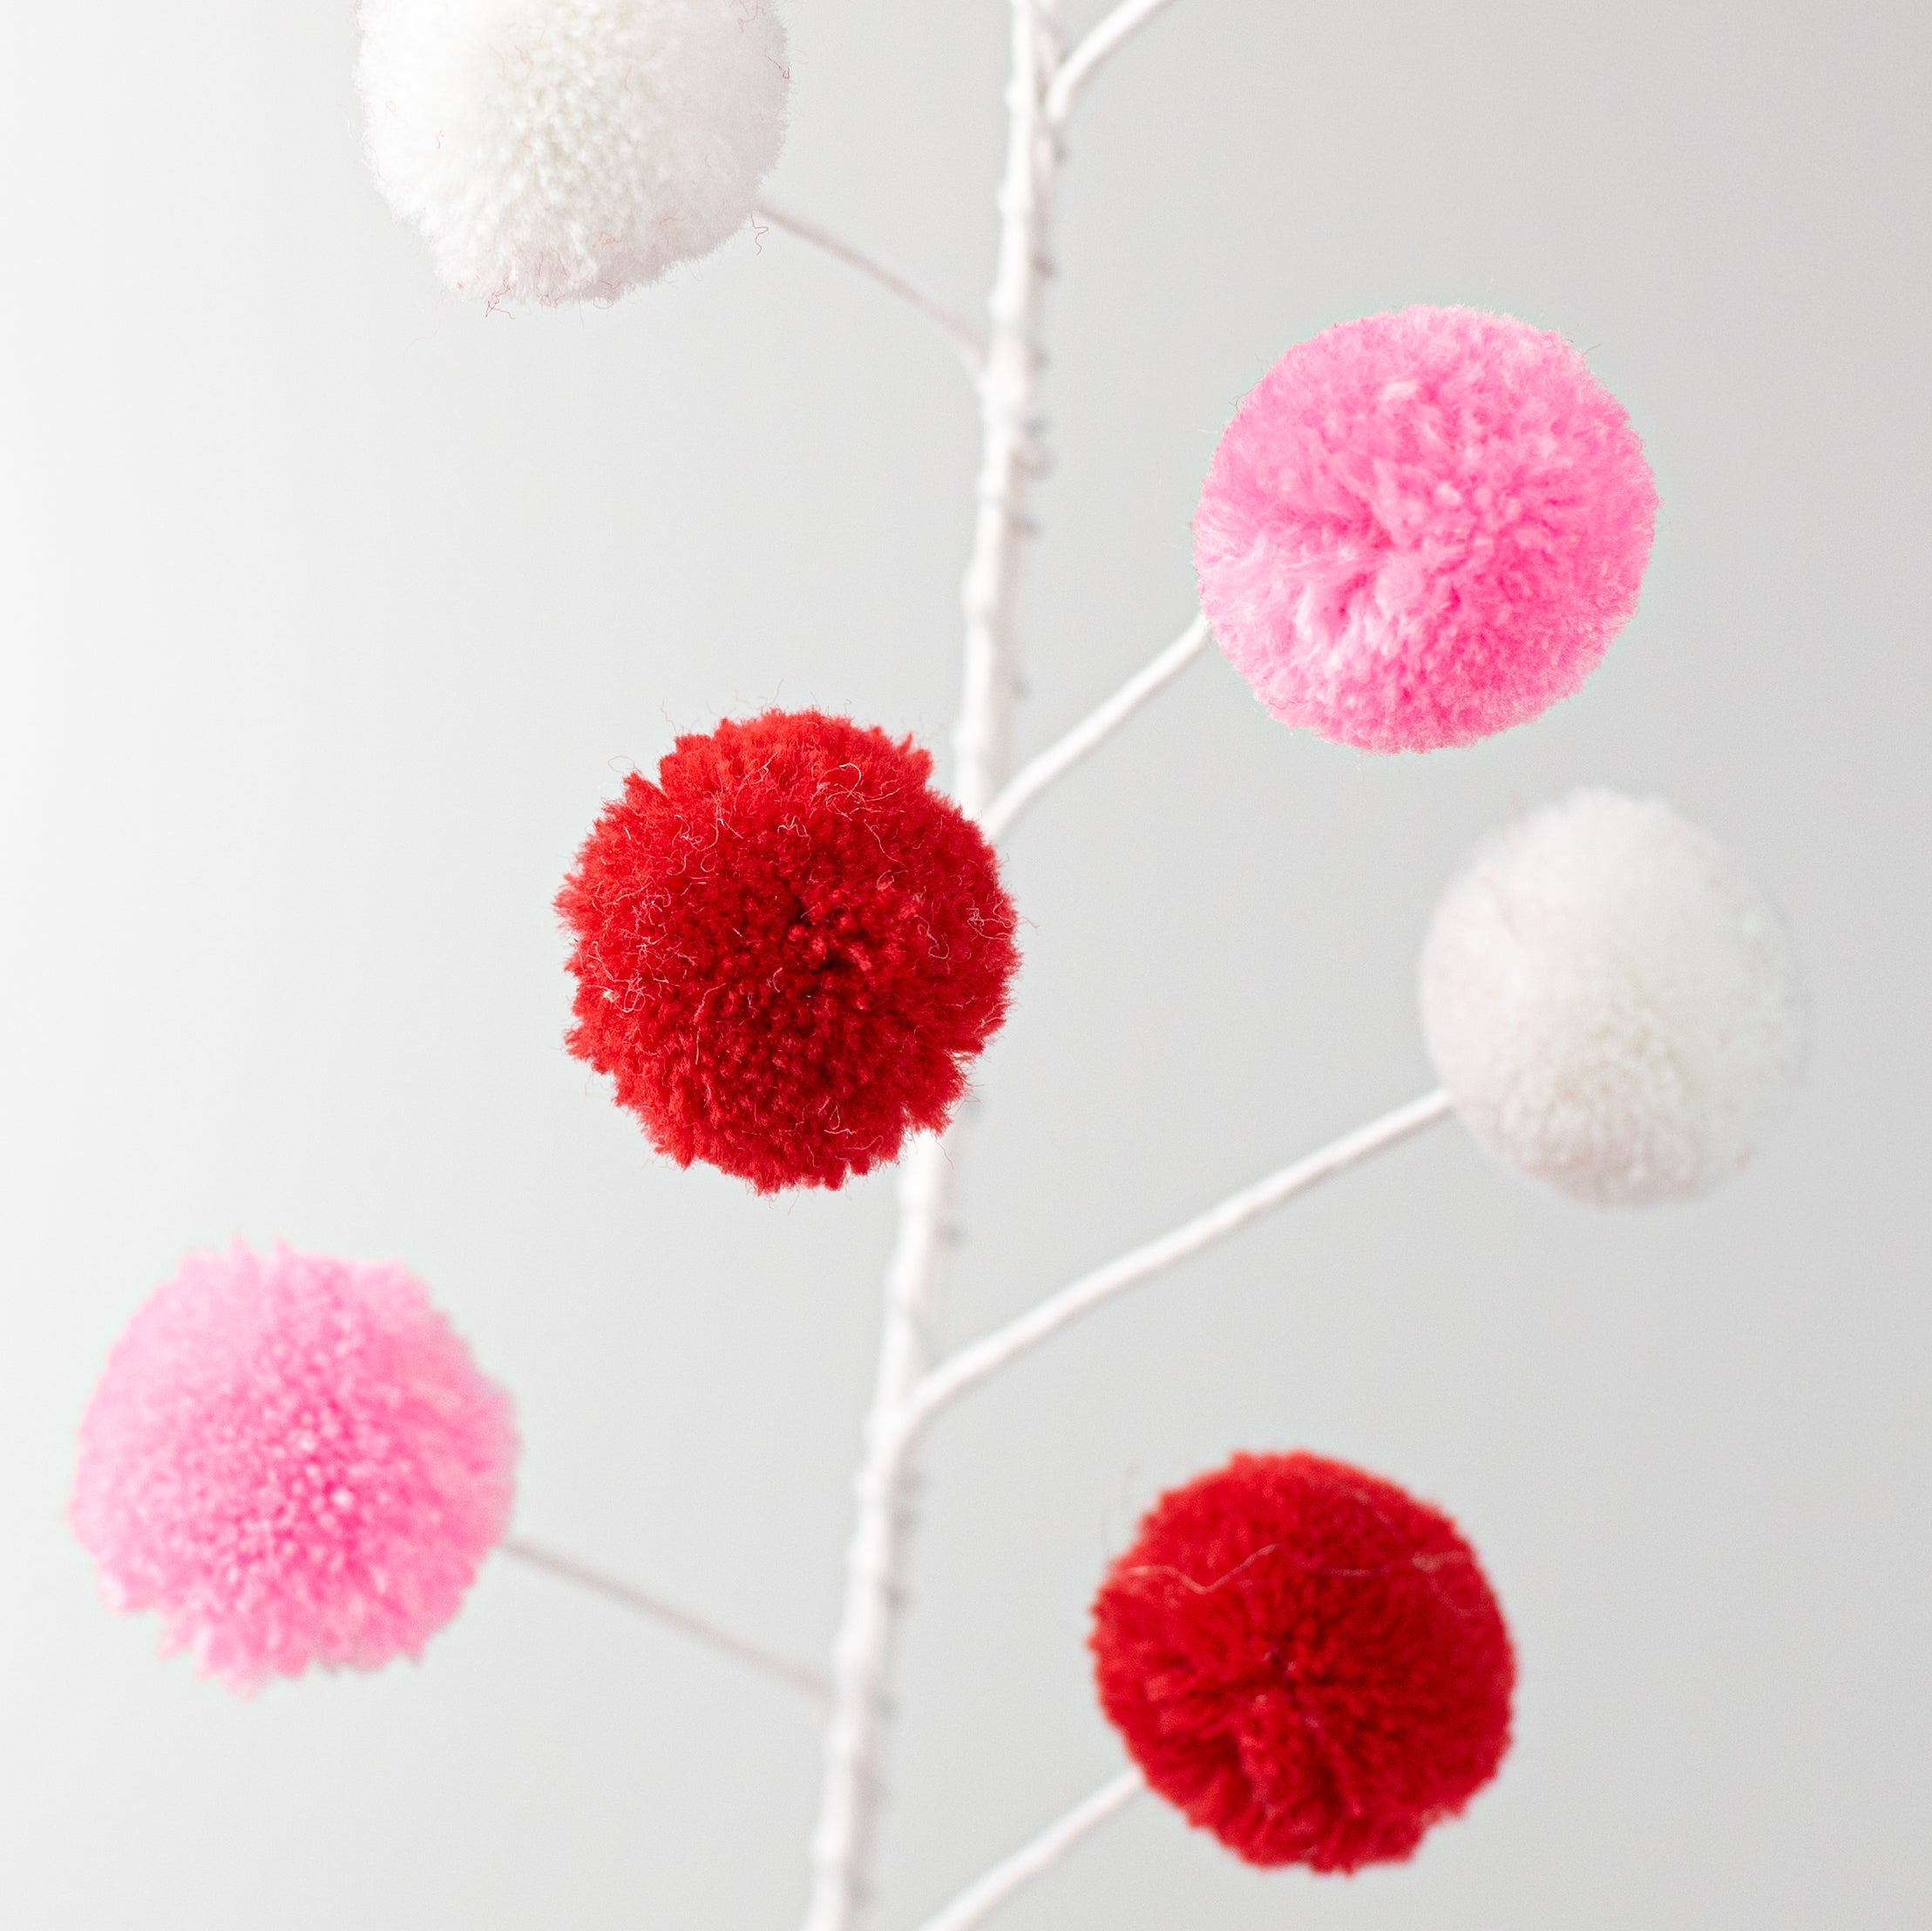 5' 3-Color Pom Pom Wire Garland: Red, White, Pink